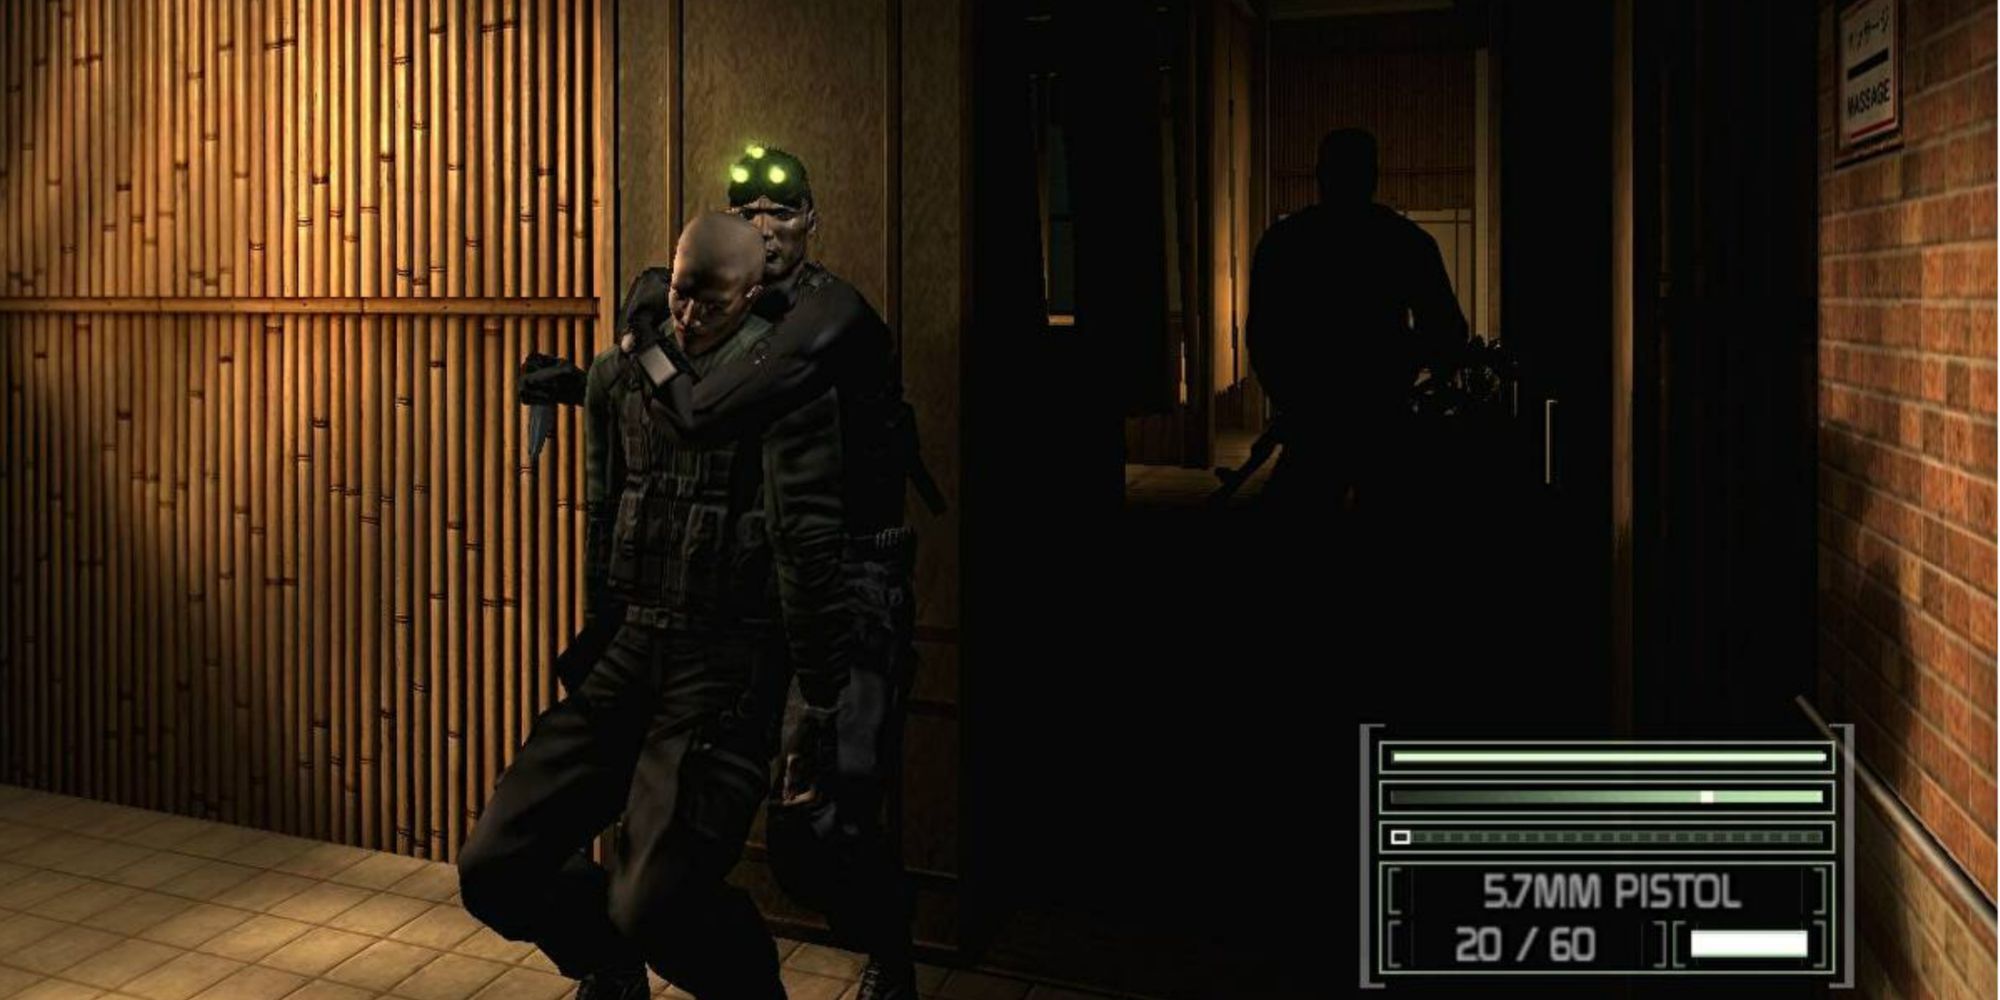 Splinter Cell Chaos Theory is still the peak of the franchise